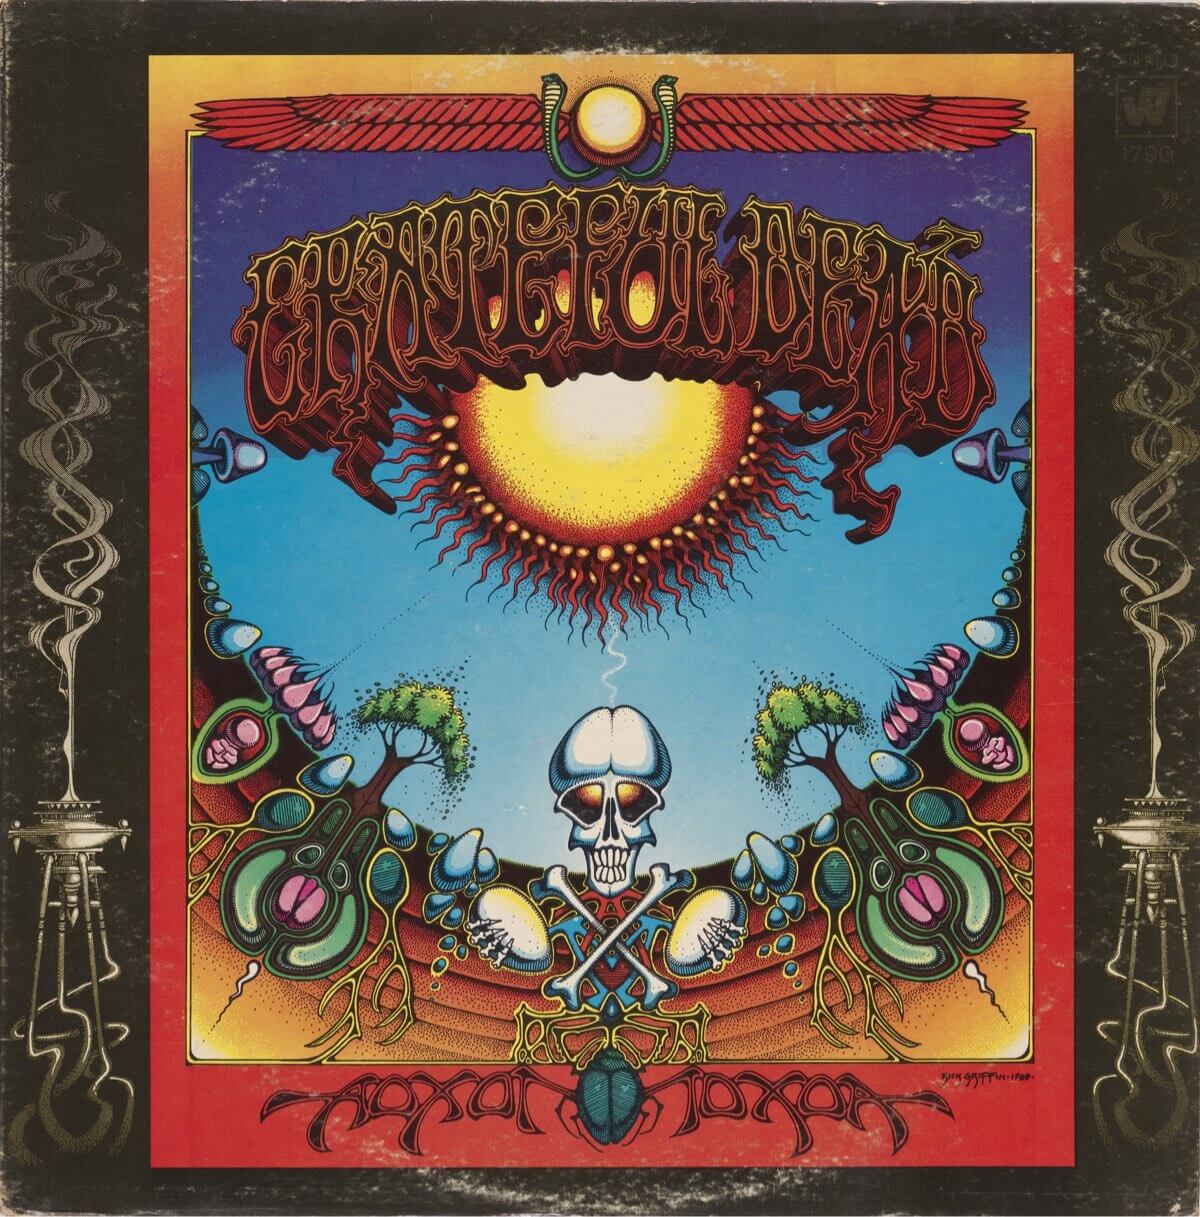 Grateful Dead album cover for Aoxomoxoa (art by Rick Griffin)